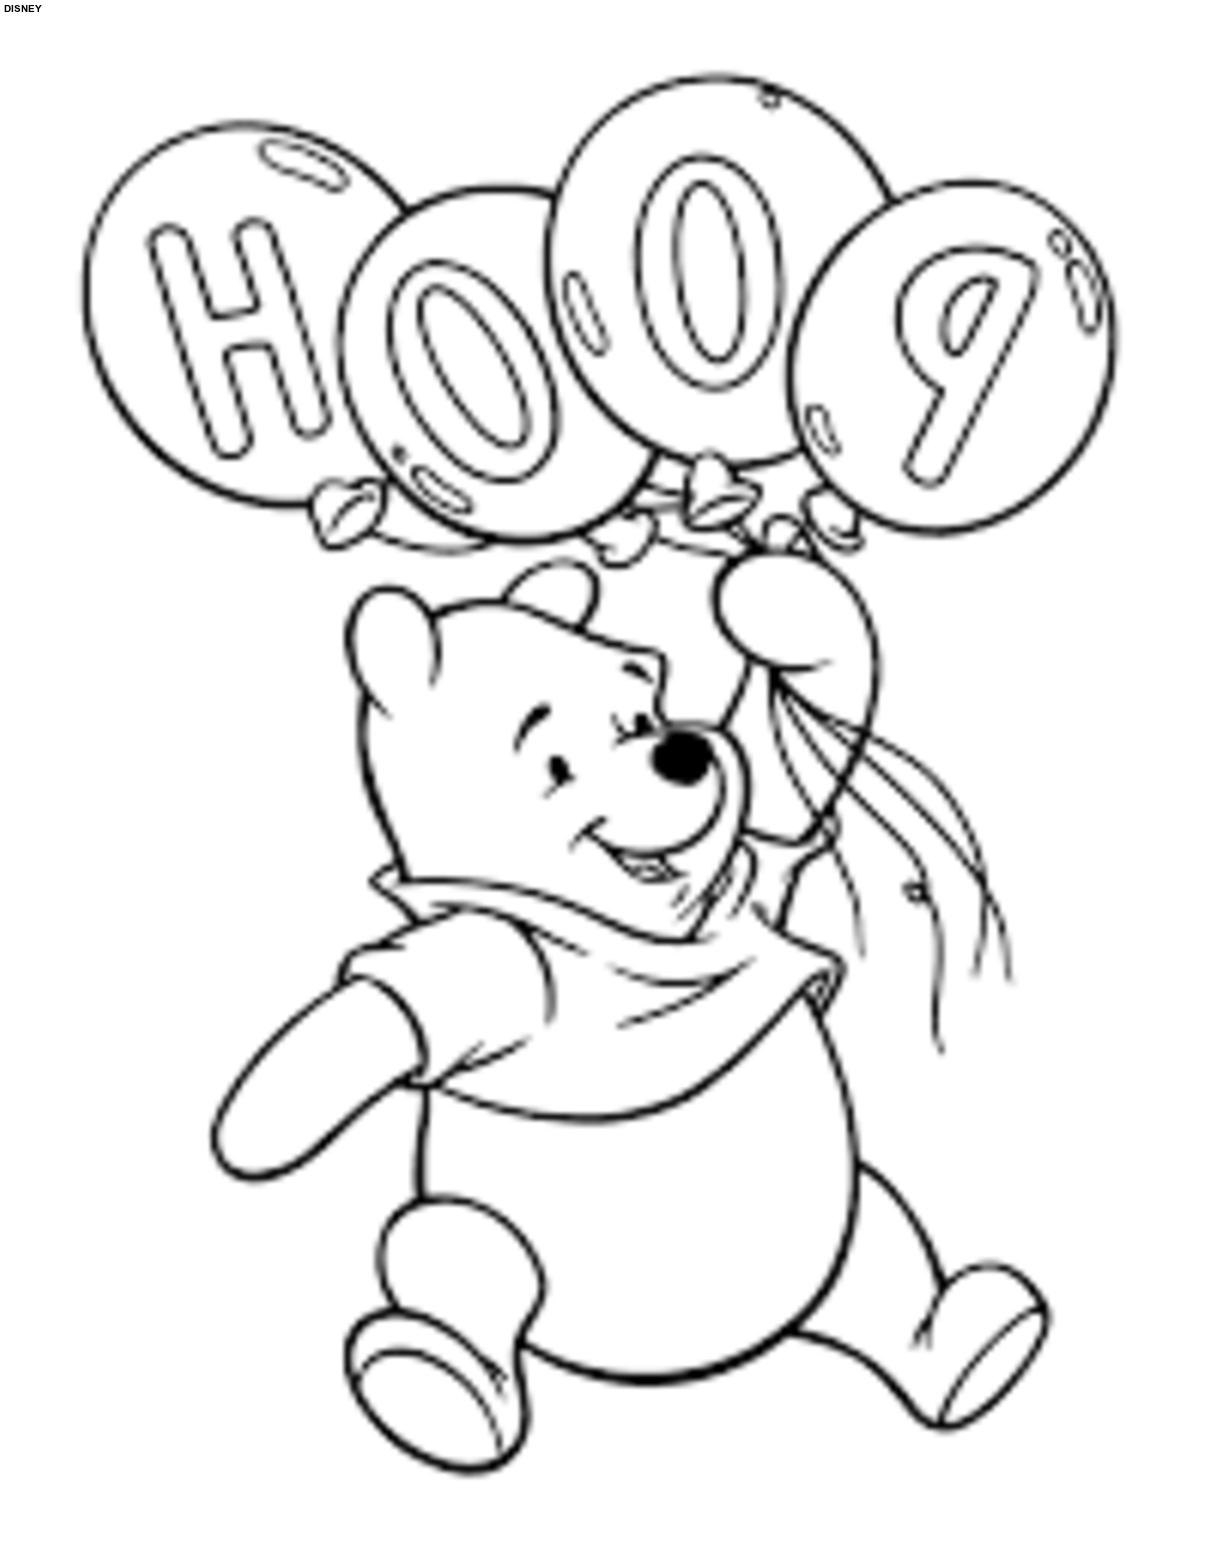 Boy Cartoon Characters Coloring Pages - Coloring Pages For All Ages